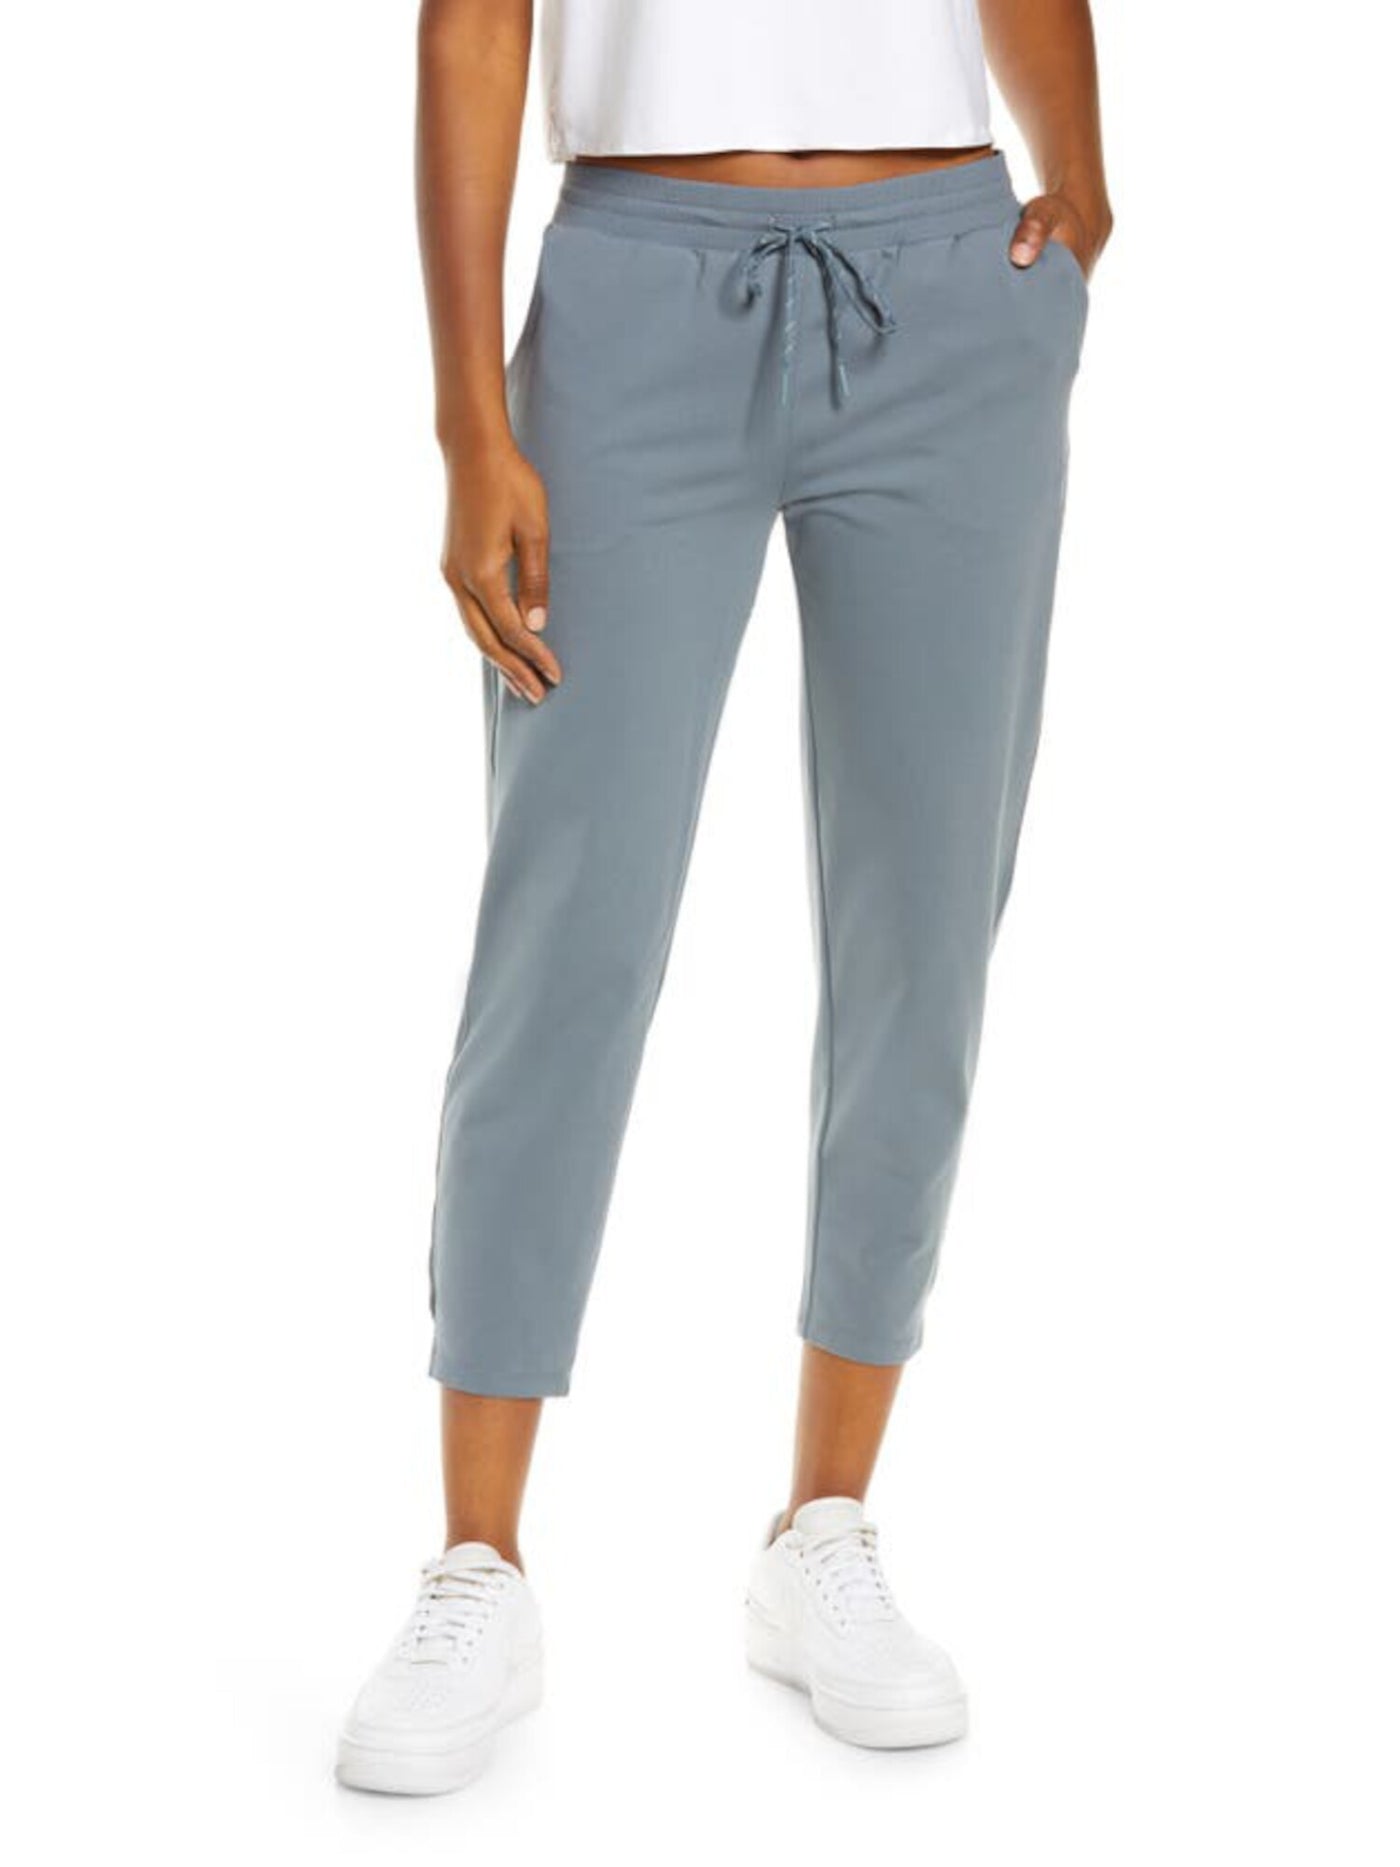 BAM BY BETSY & ADAM Womens Blue Stretch Pocketed Draw String Waist, Tapered Lounge Pants S